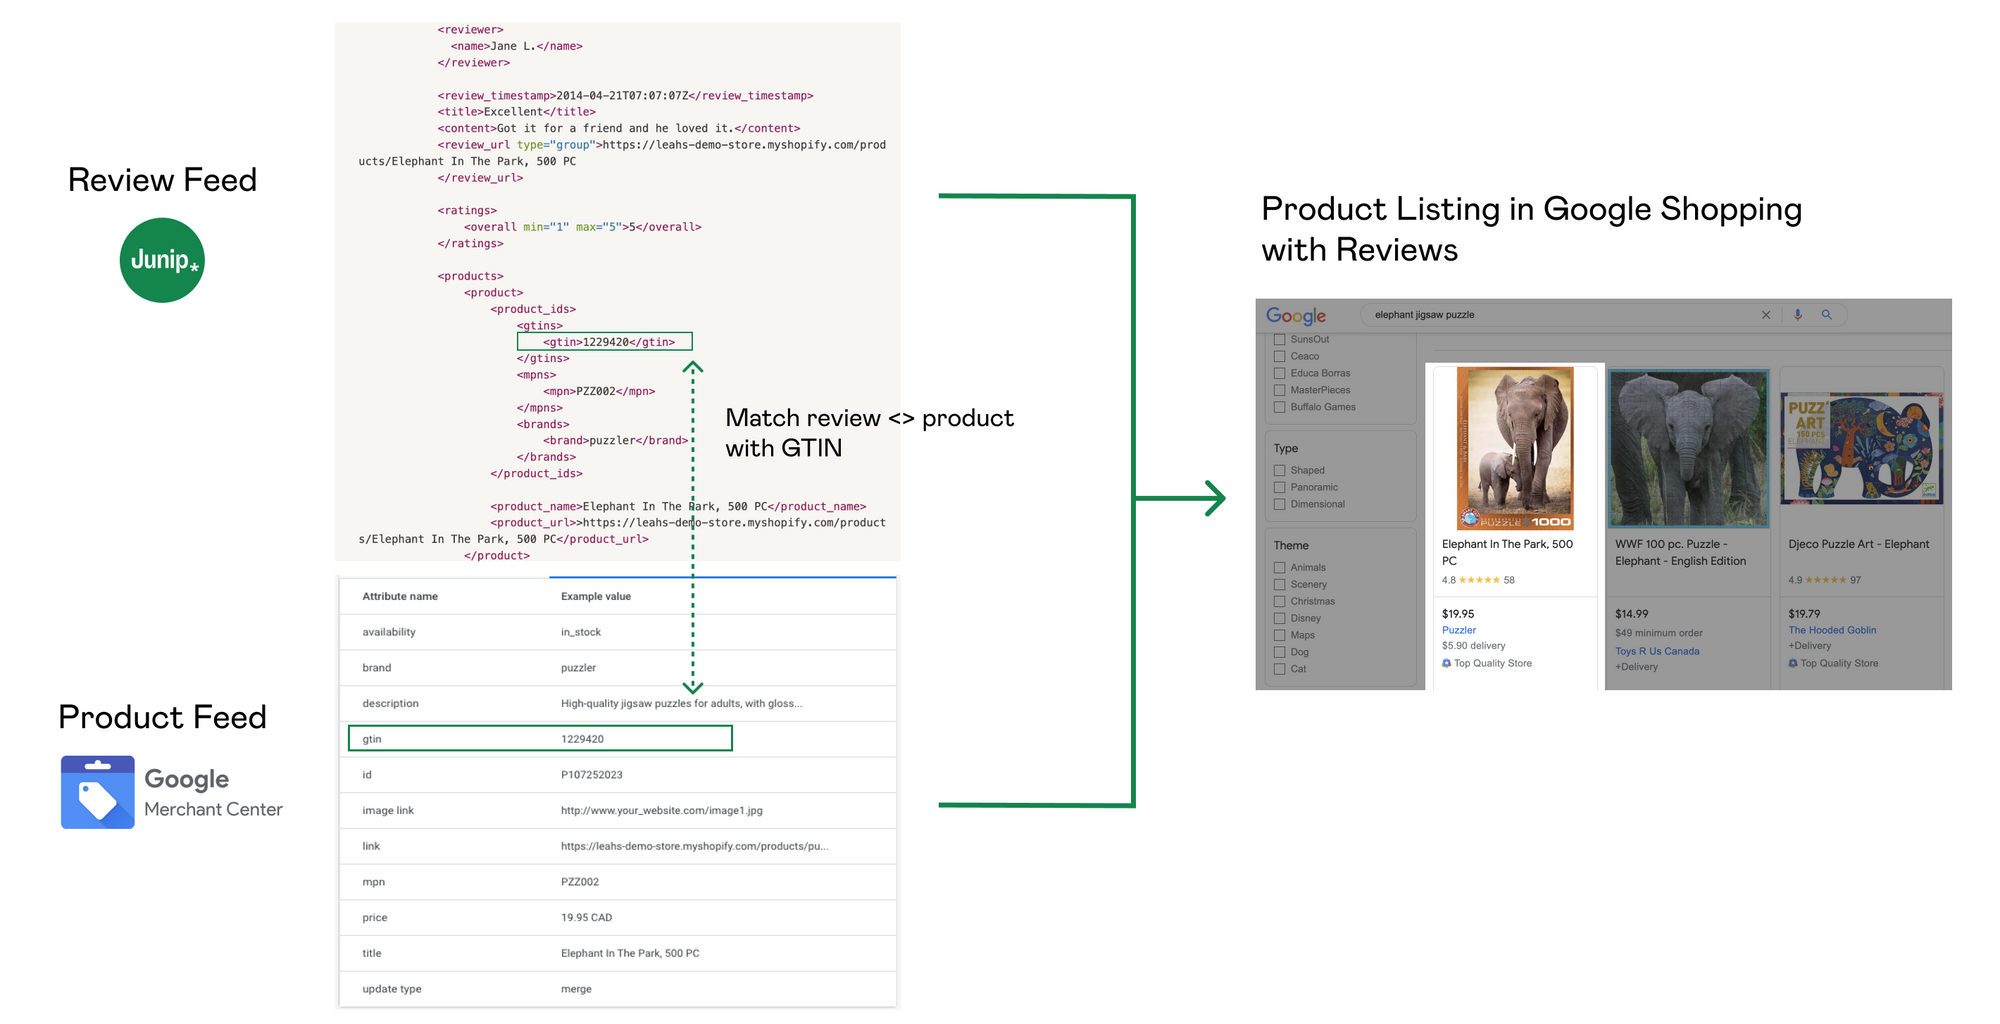 Example of how product matching works in Google Shopping